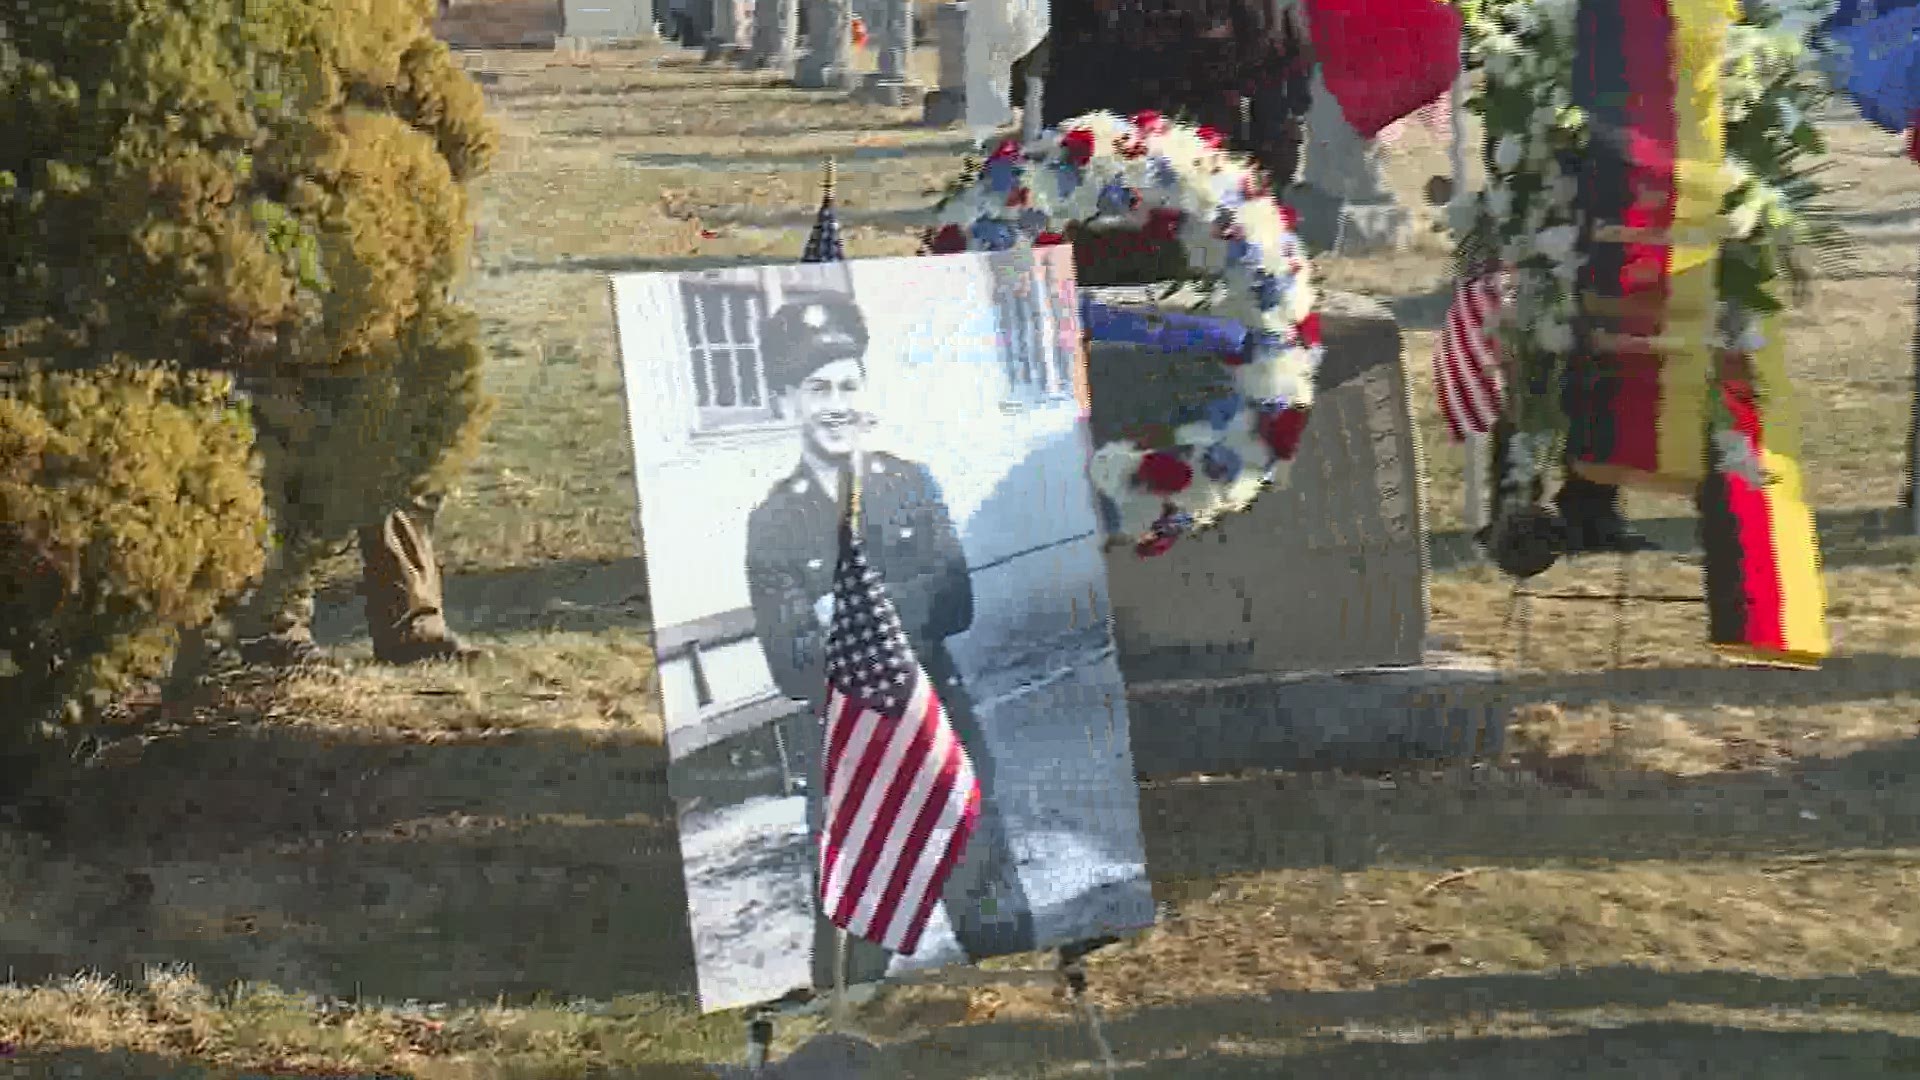 A family from Scranton finally has some closure 75 years after losing a son and brother in World War II.